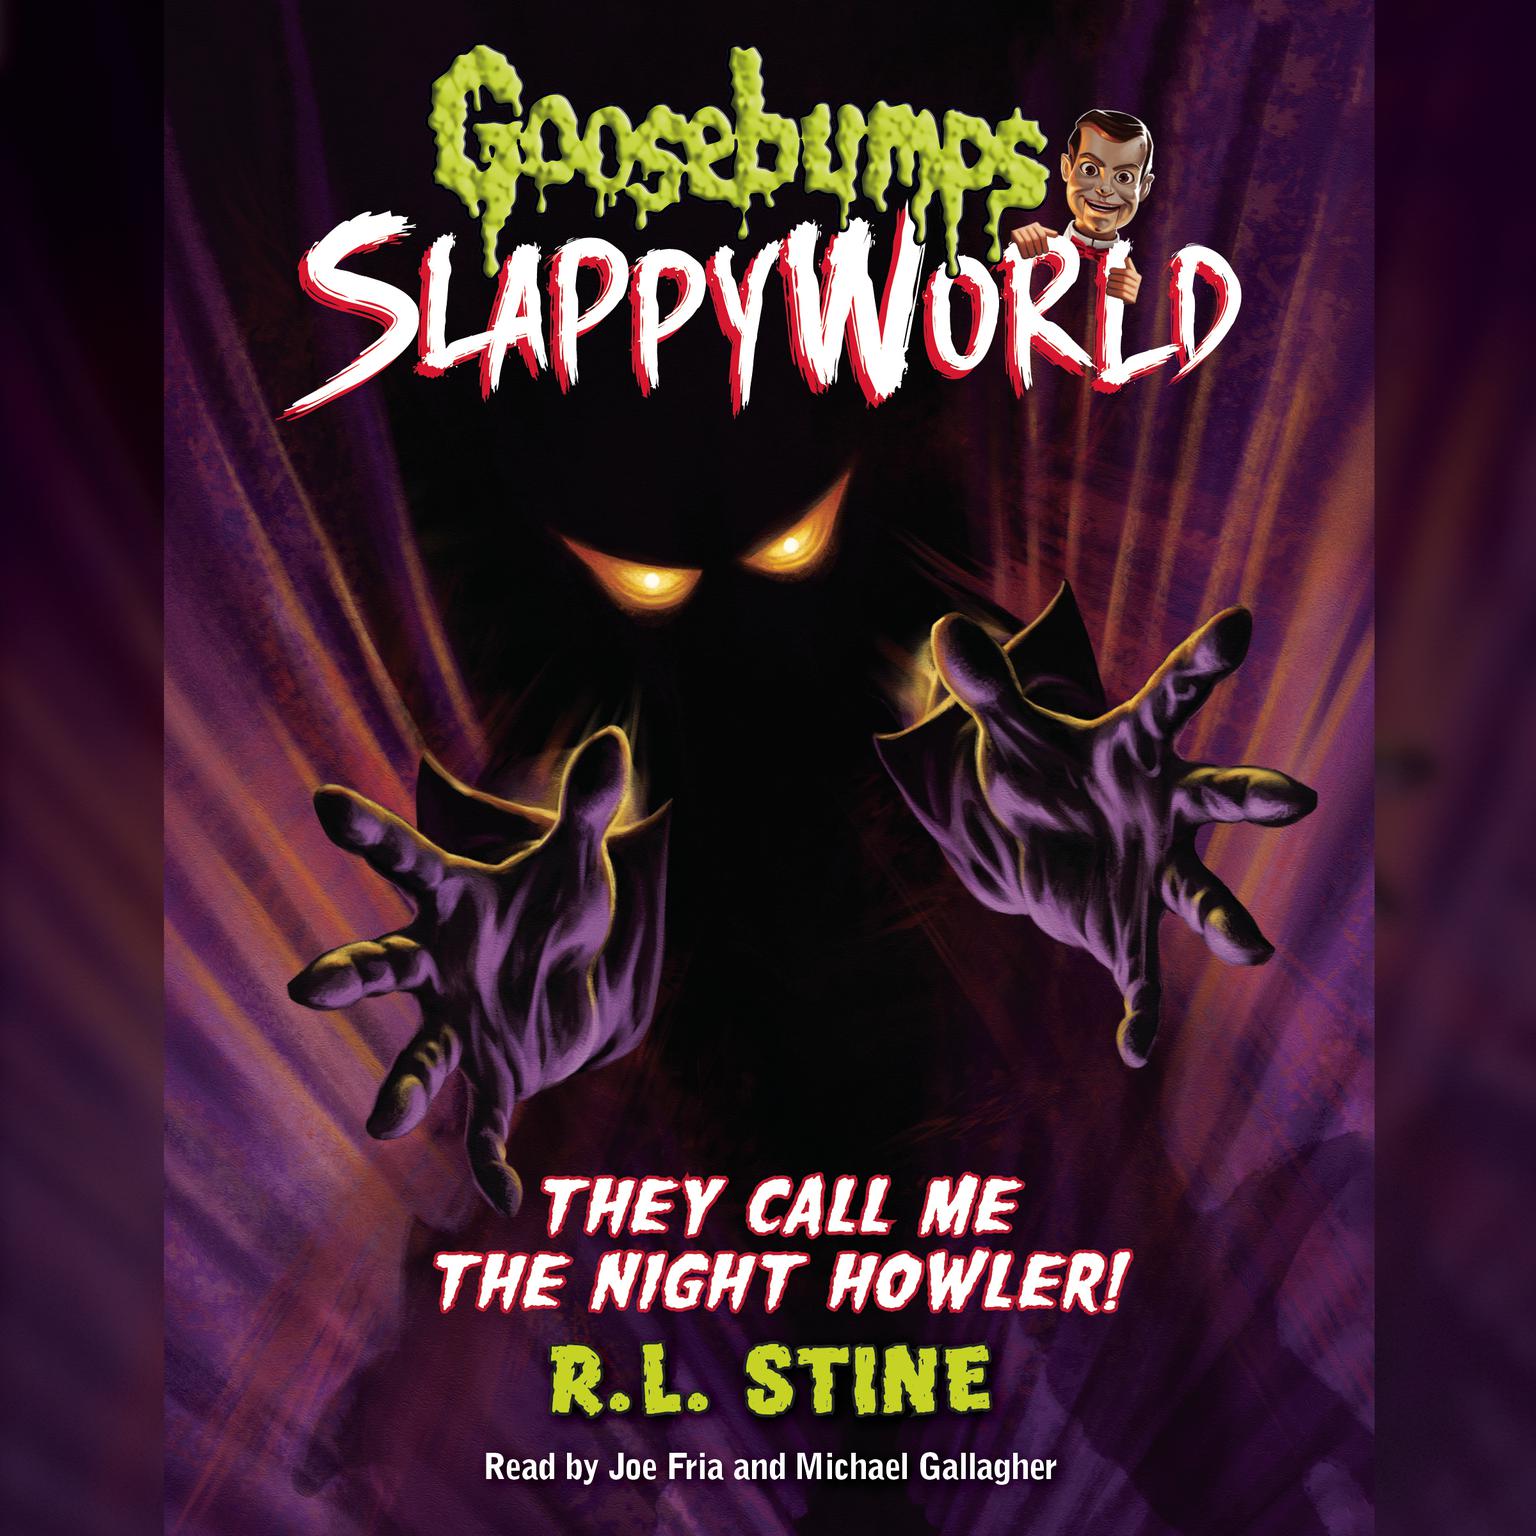 They Call Me the Night Howler! (Goosebumps SlappyWorld #11) Audiobook, by R. L. Stine